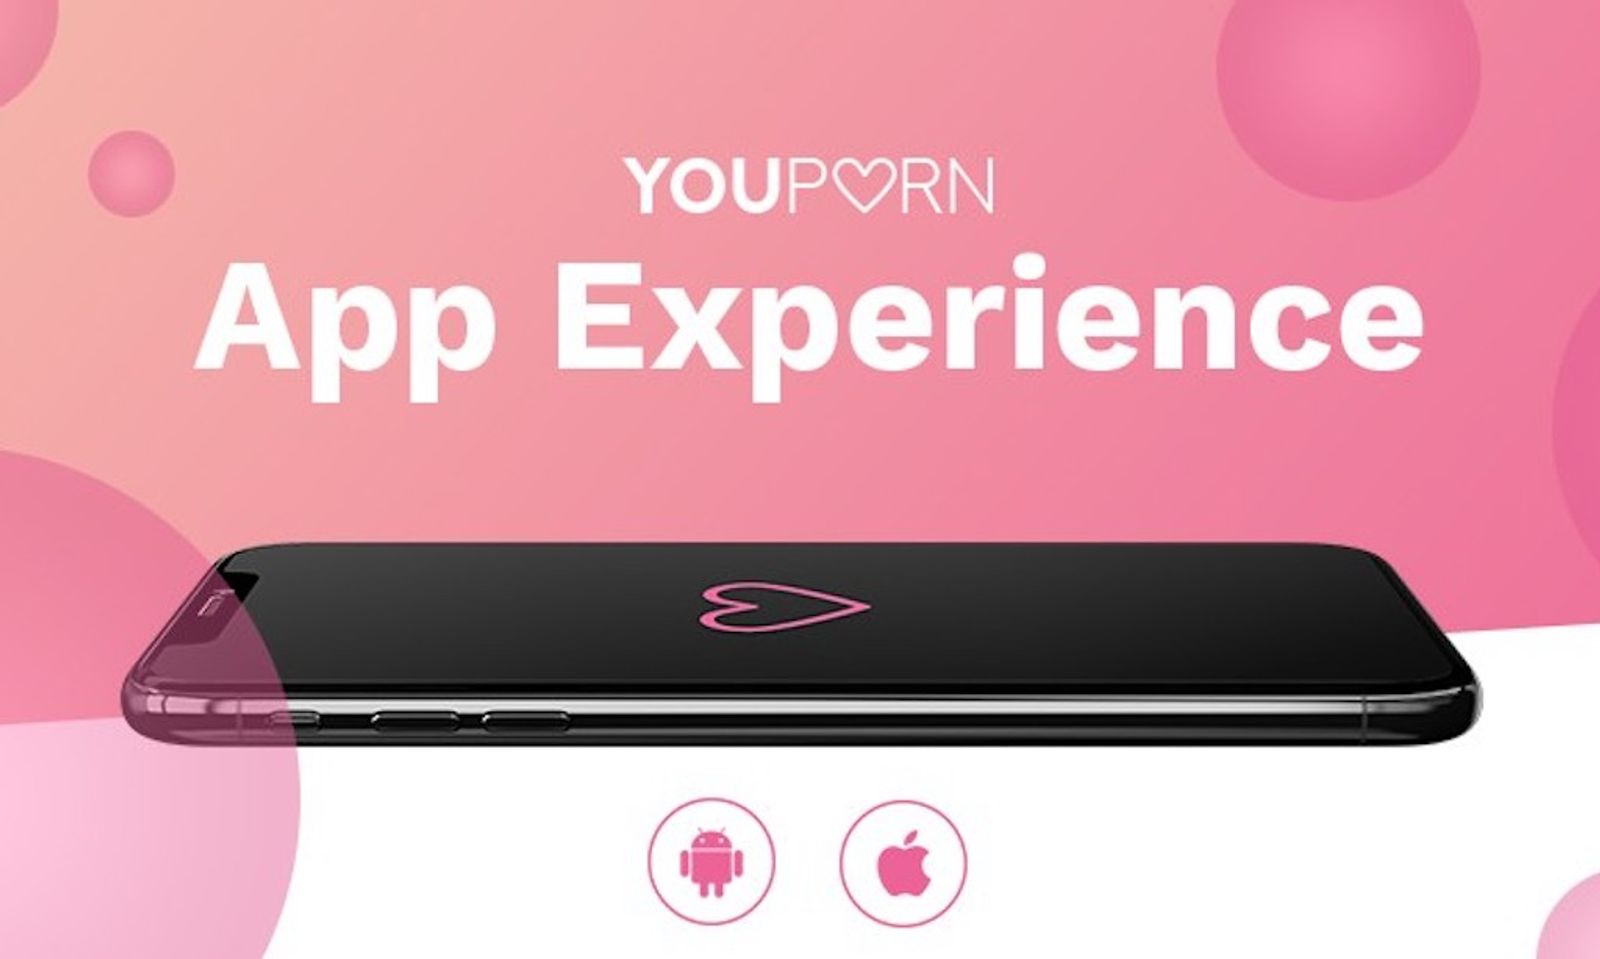 Media Fascinated By New YouPorn App ‘Experience’